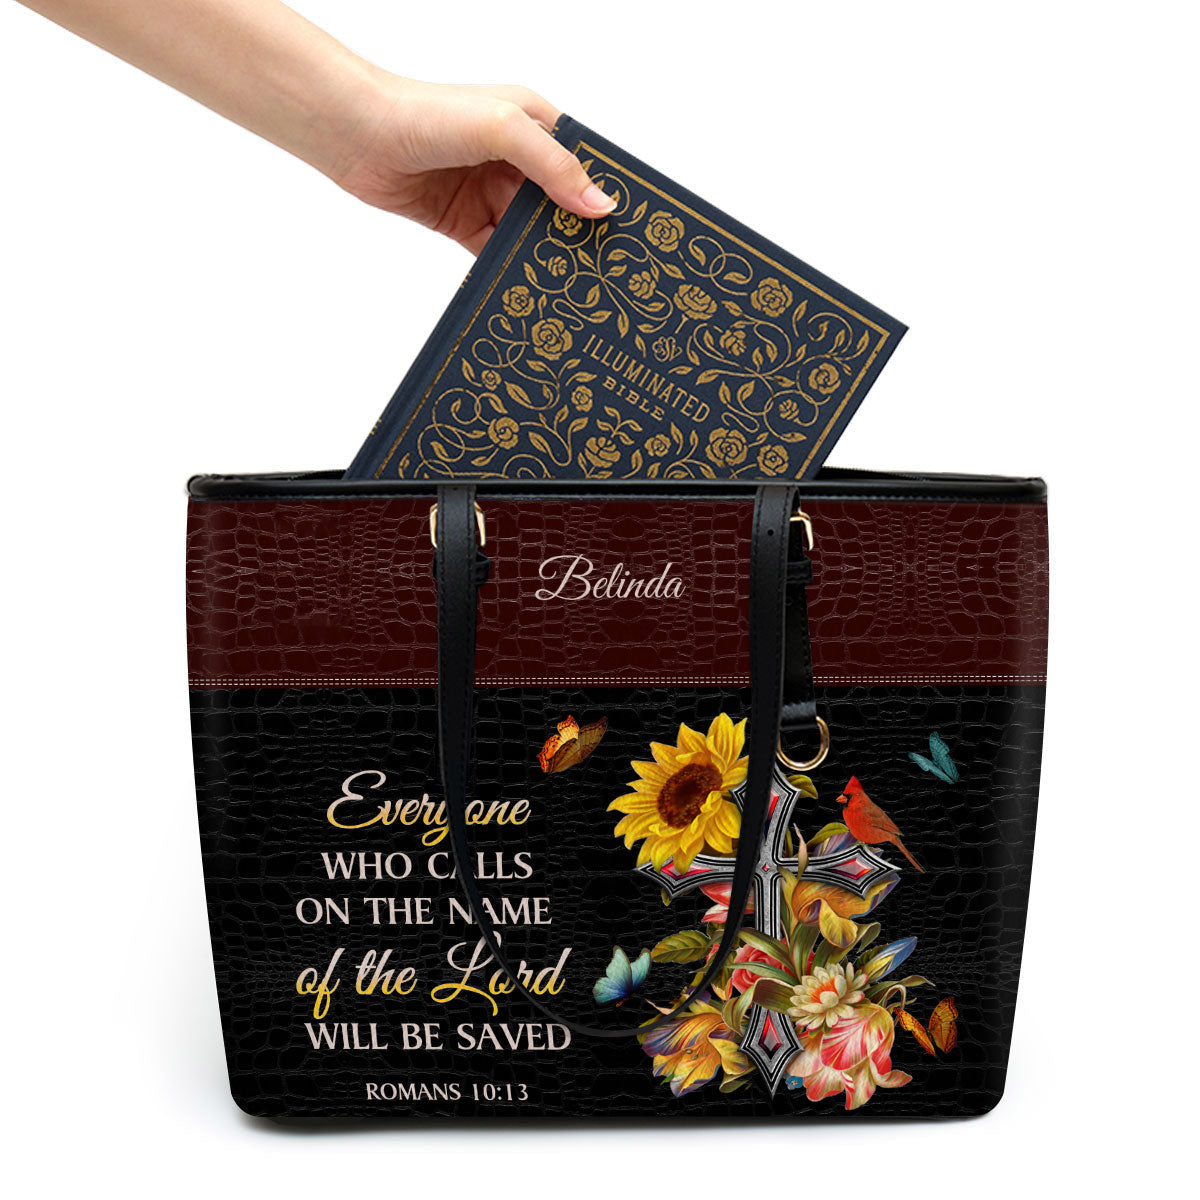 Everyone Who Calls On The Name Of The Lord Will Be Saved Personalized Large Leather Tote Bag - Christian Gifts For Women